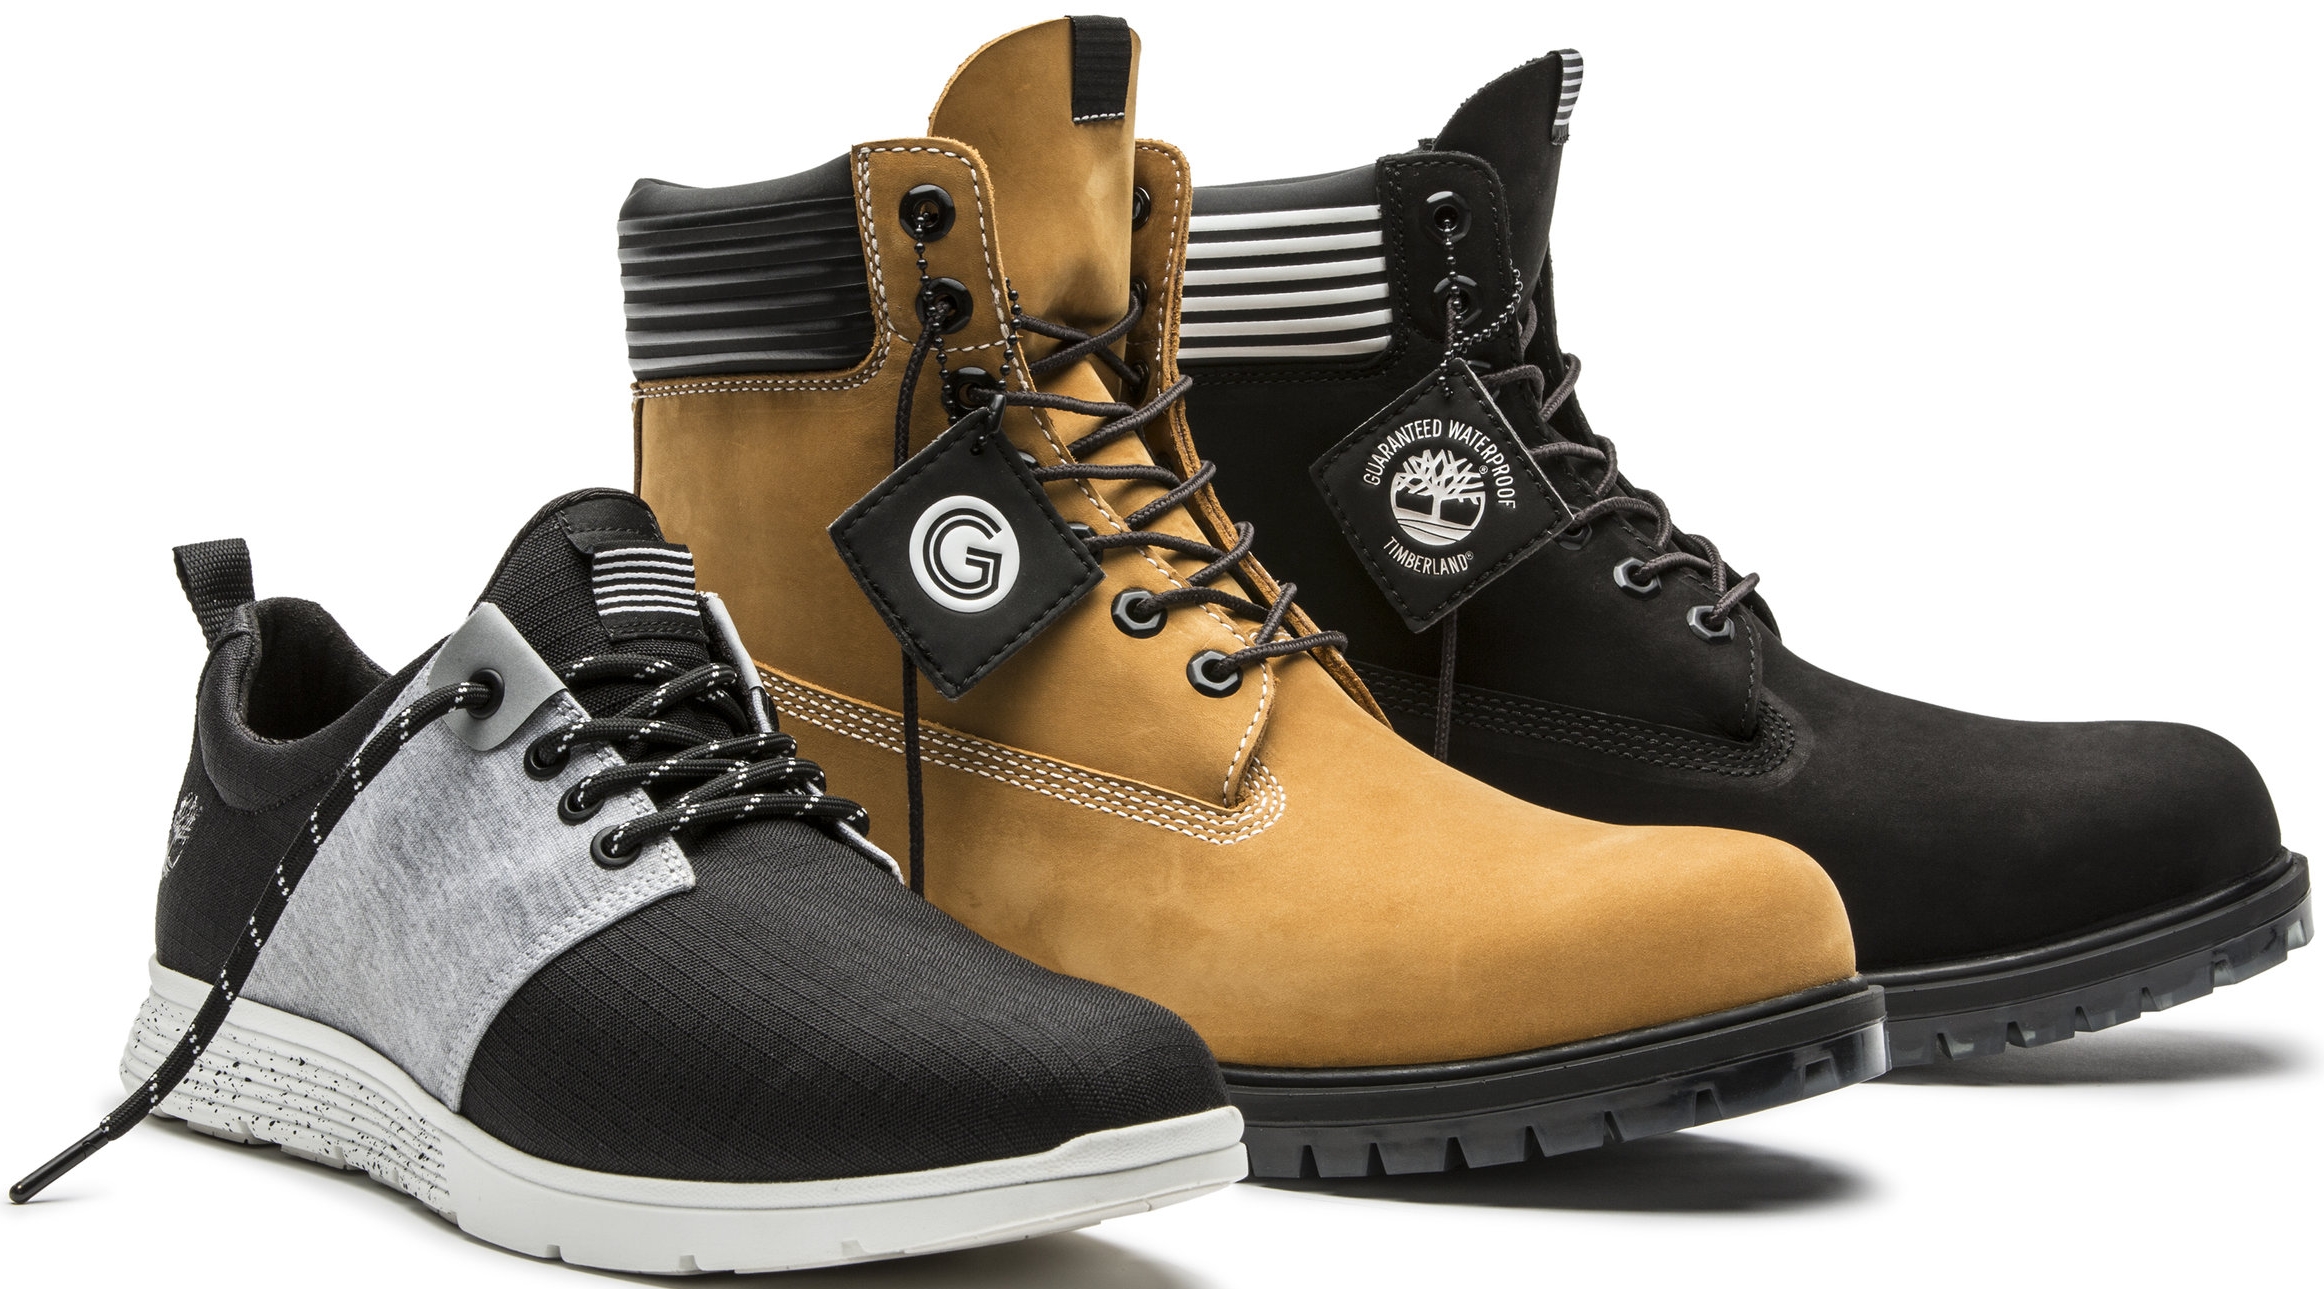 Grungy Gentleman x Timberland, (Boots) $240, (Sneakers) $110